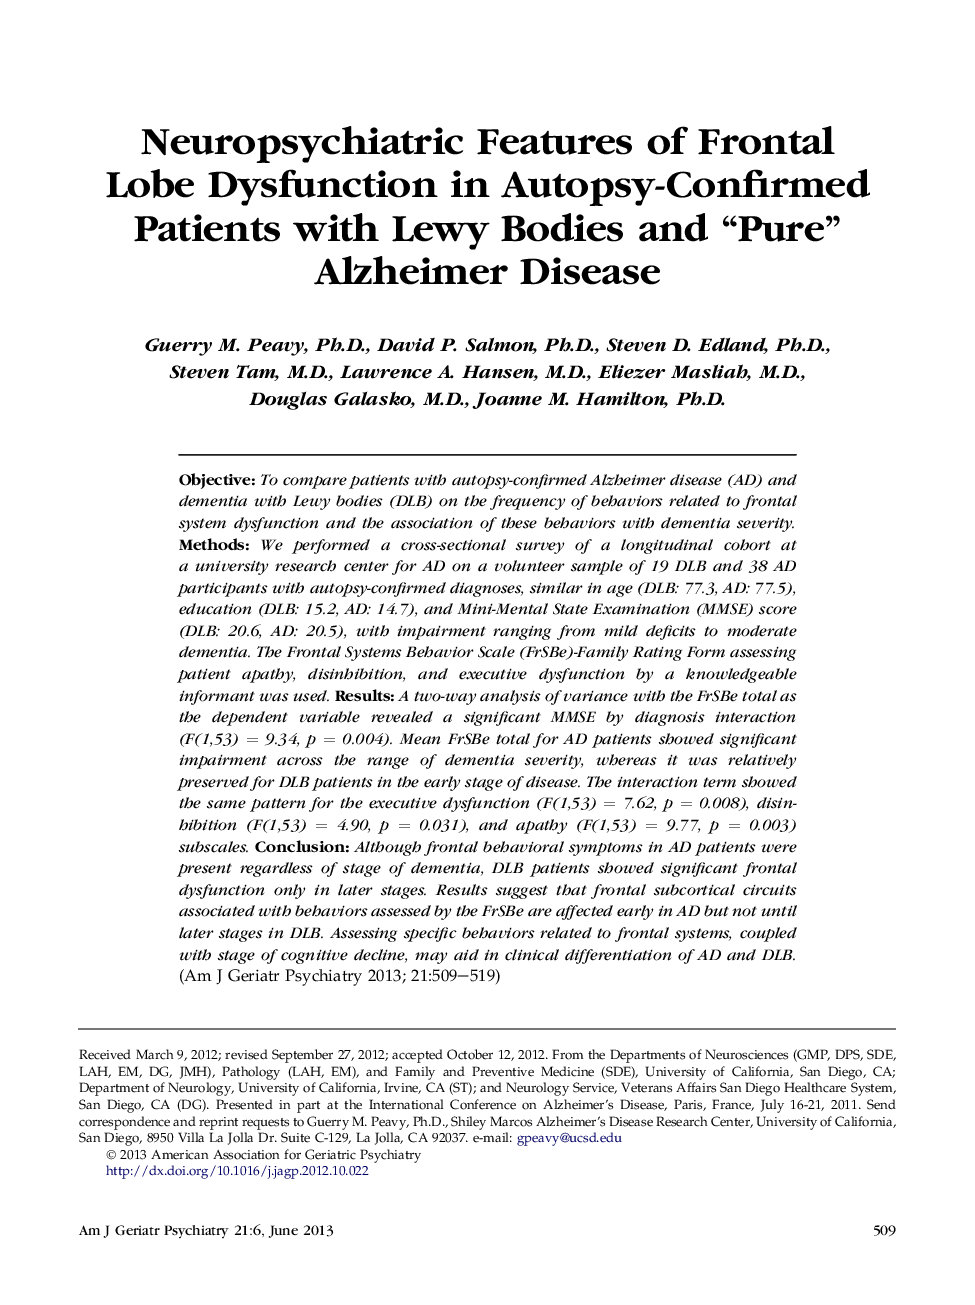 Neuropsychiatric Features of Frontal LobeÂ Dysfunction in Autopsy-Confirmed Patients with Lewy Bodies and “Pure” Alzheimer Disease